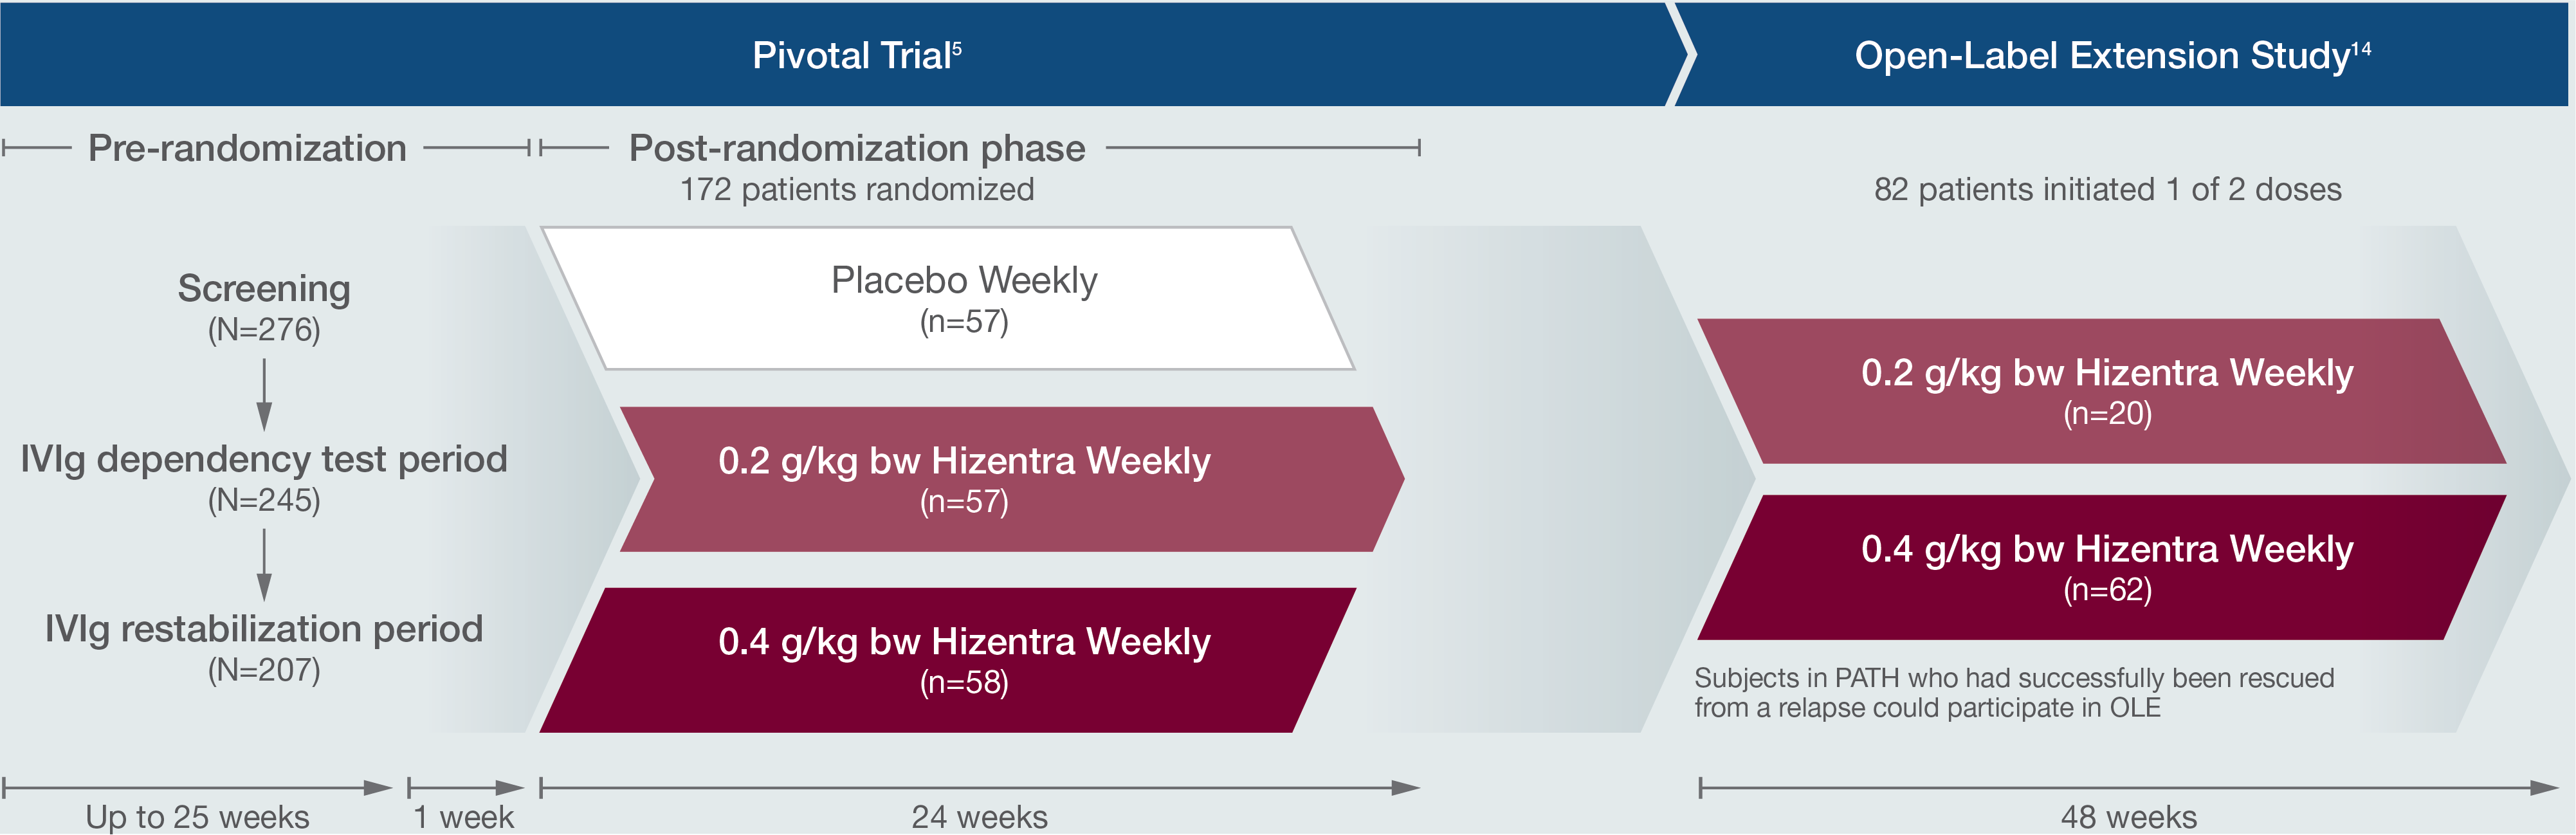 CIDP Pivotal Trial and Open-Label Extension Study Chart